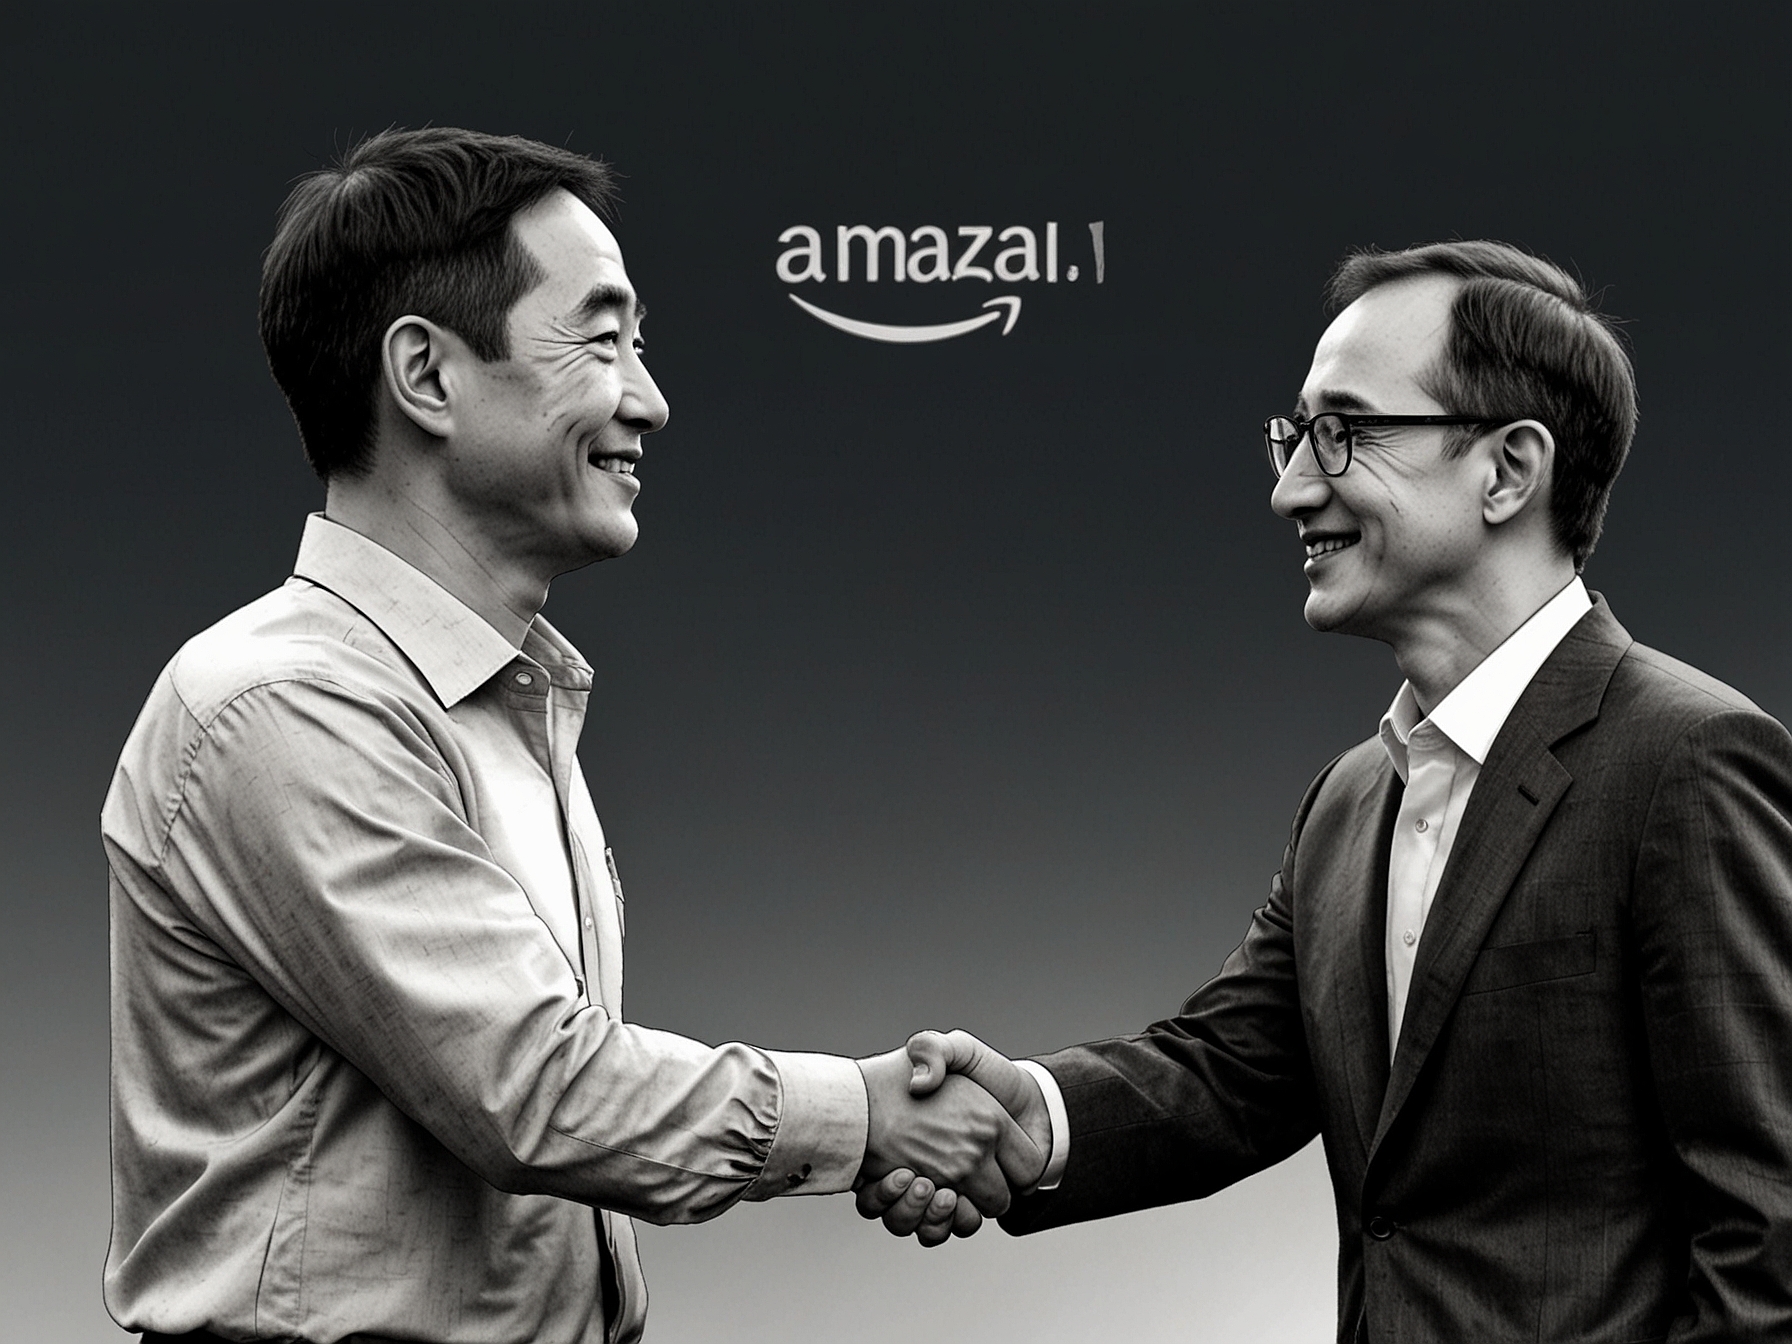 SK Group Chairman Chey Tae-won shaking hands with Amazon CEO Andy Jassy and Intel CEO Pat Gelsinger, symbolizing the strategic partnership to advance AI semiconductor technology.